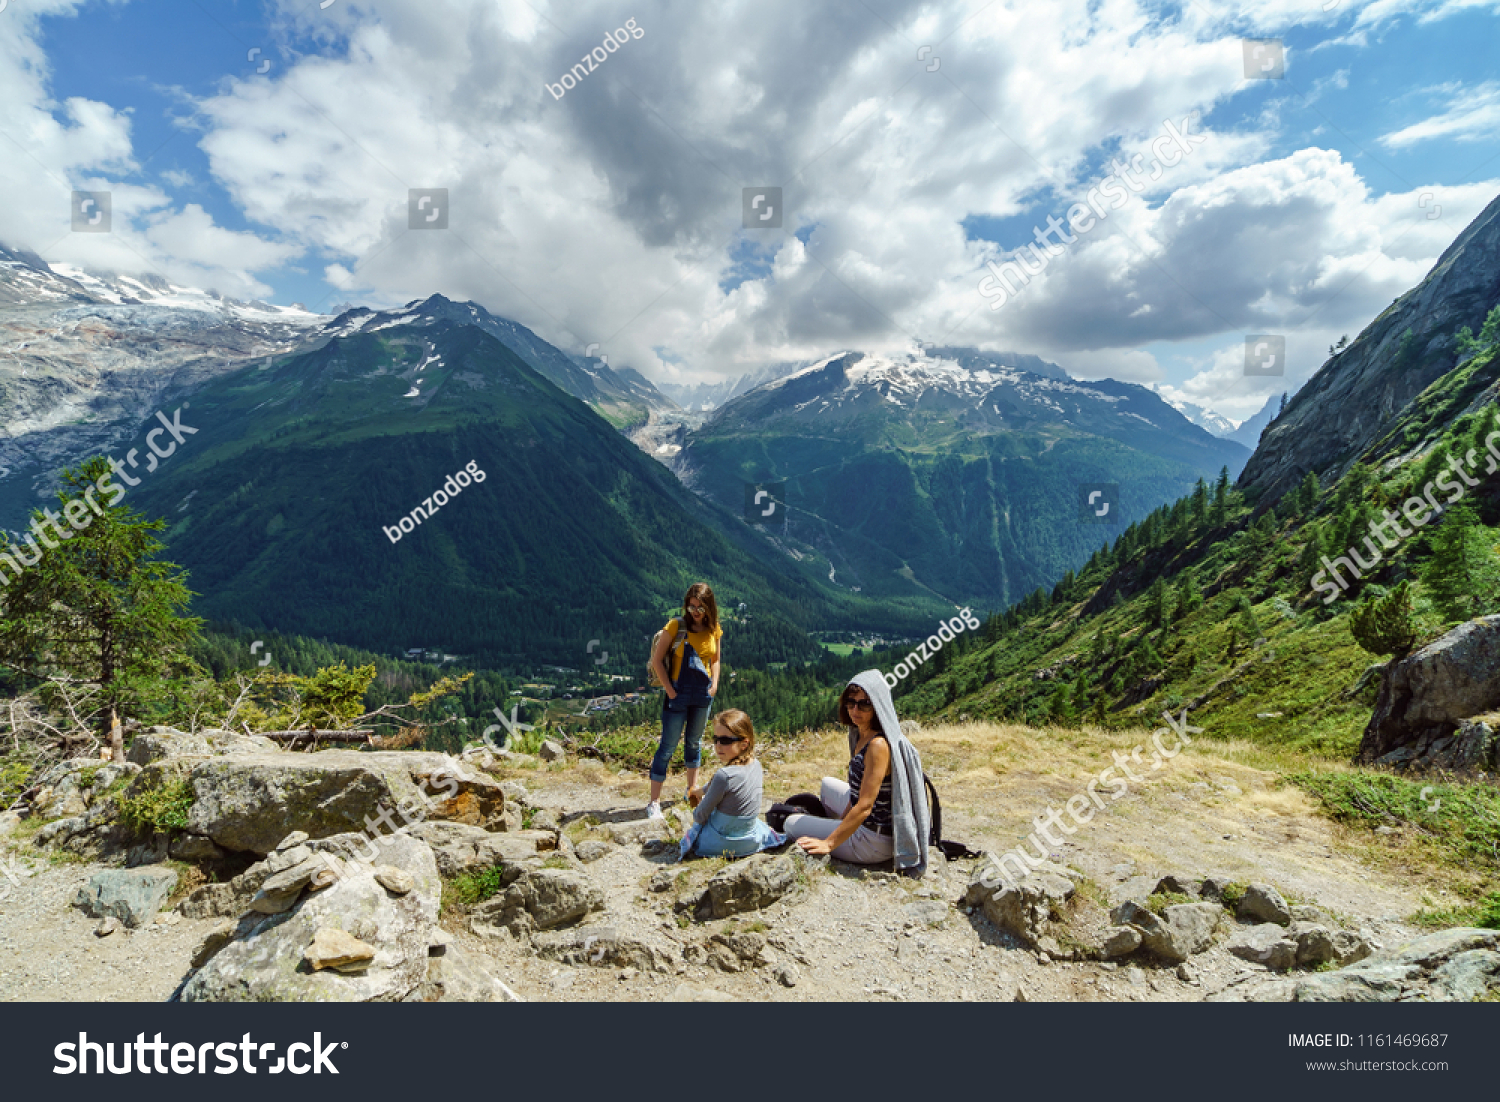 Family hiking in mountains, Alps, France, sunny #1161469687